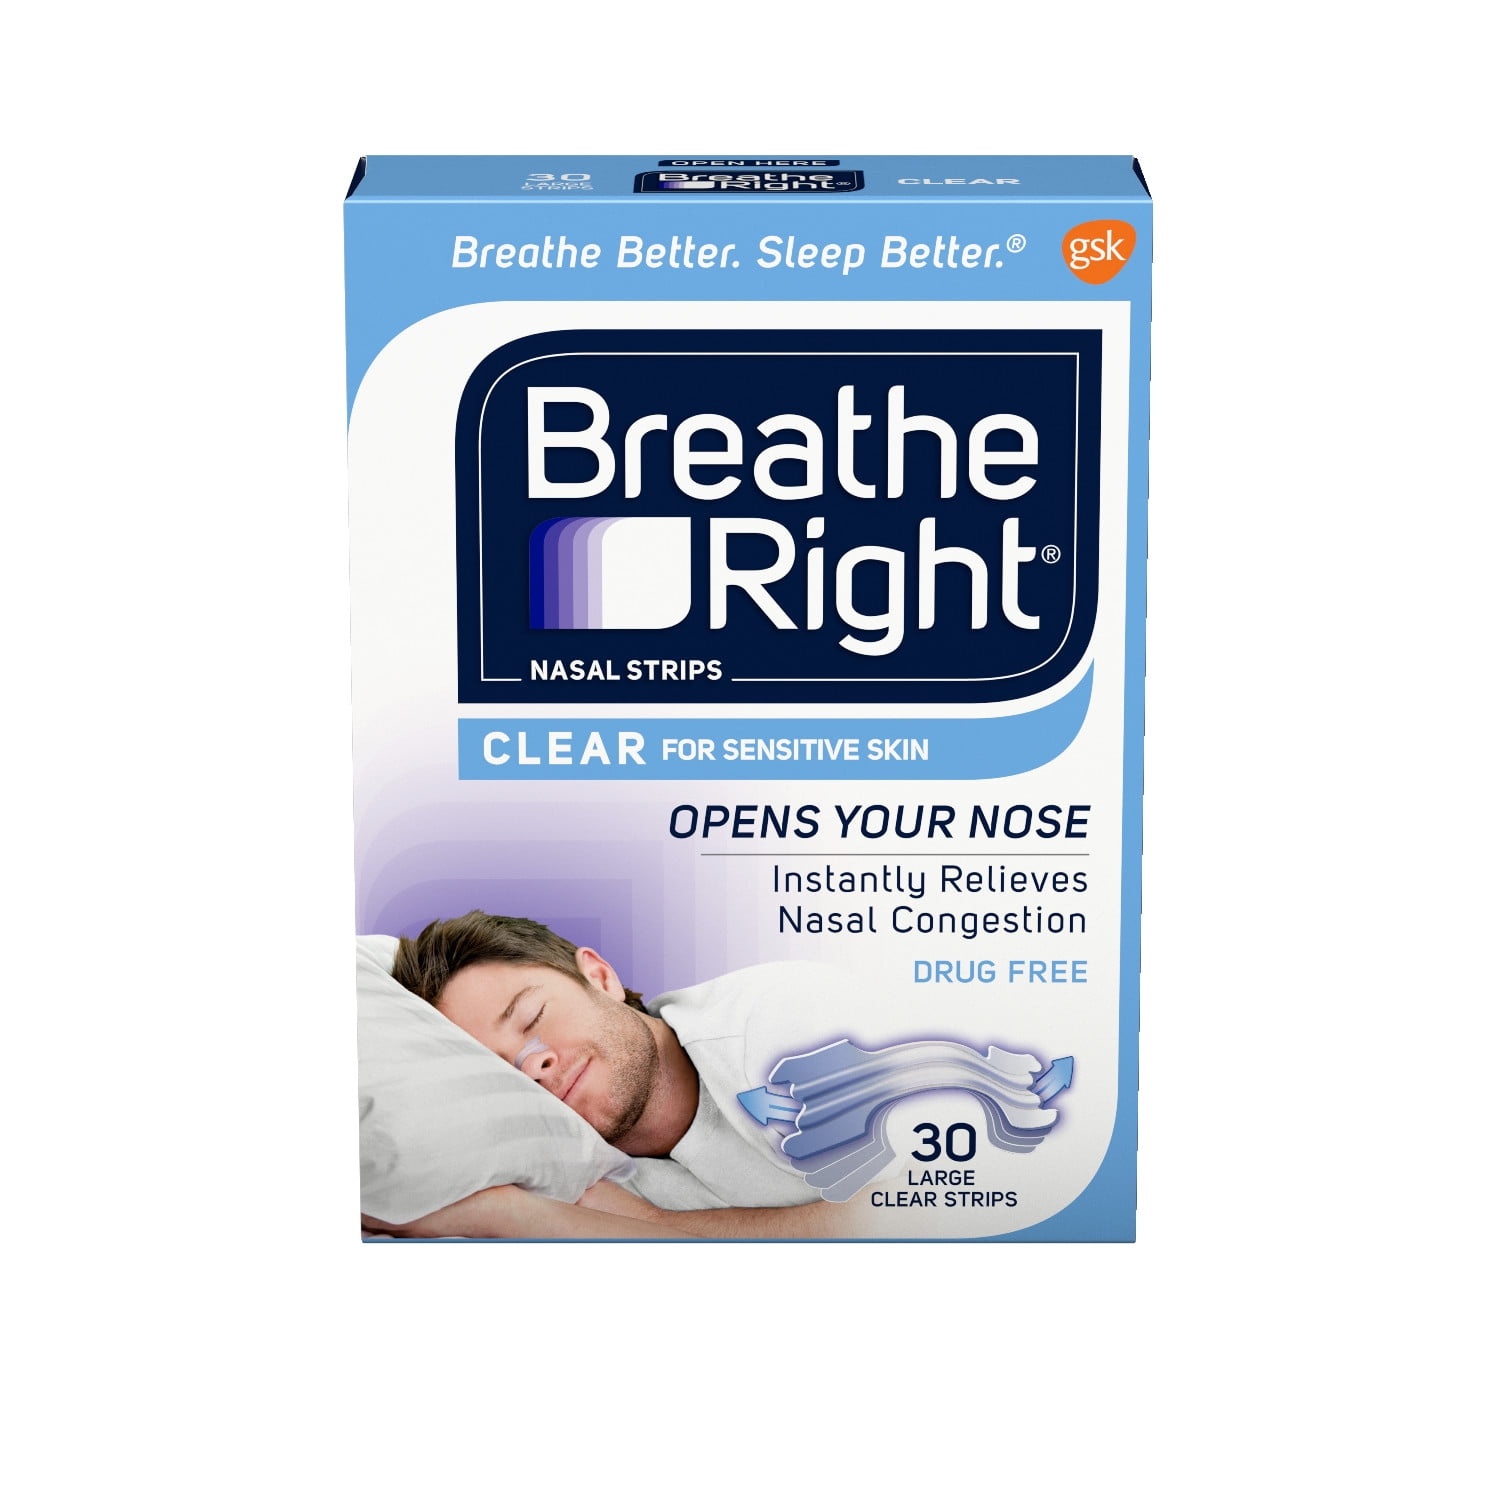 Breathe Right Original Clear Nasal Strips, Nasal Congestion Relief due to  Colds & Allergies, Large, Clear for Sensitive Skin, Drug-Free, 30 count